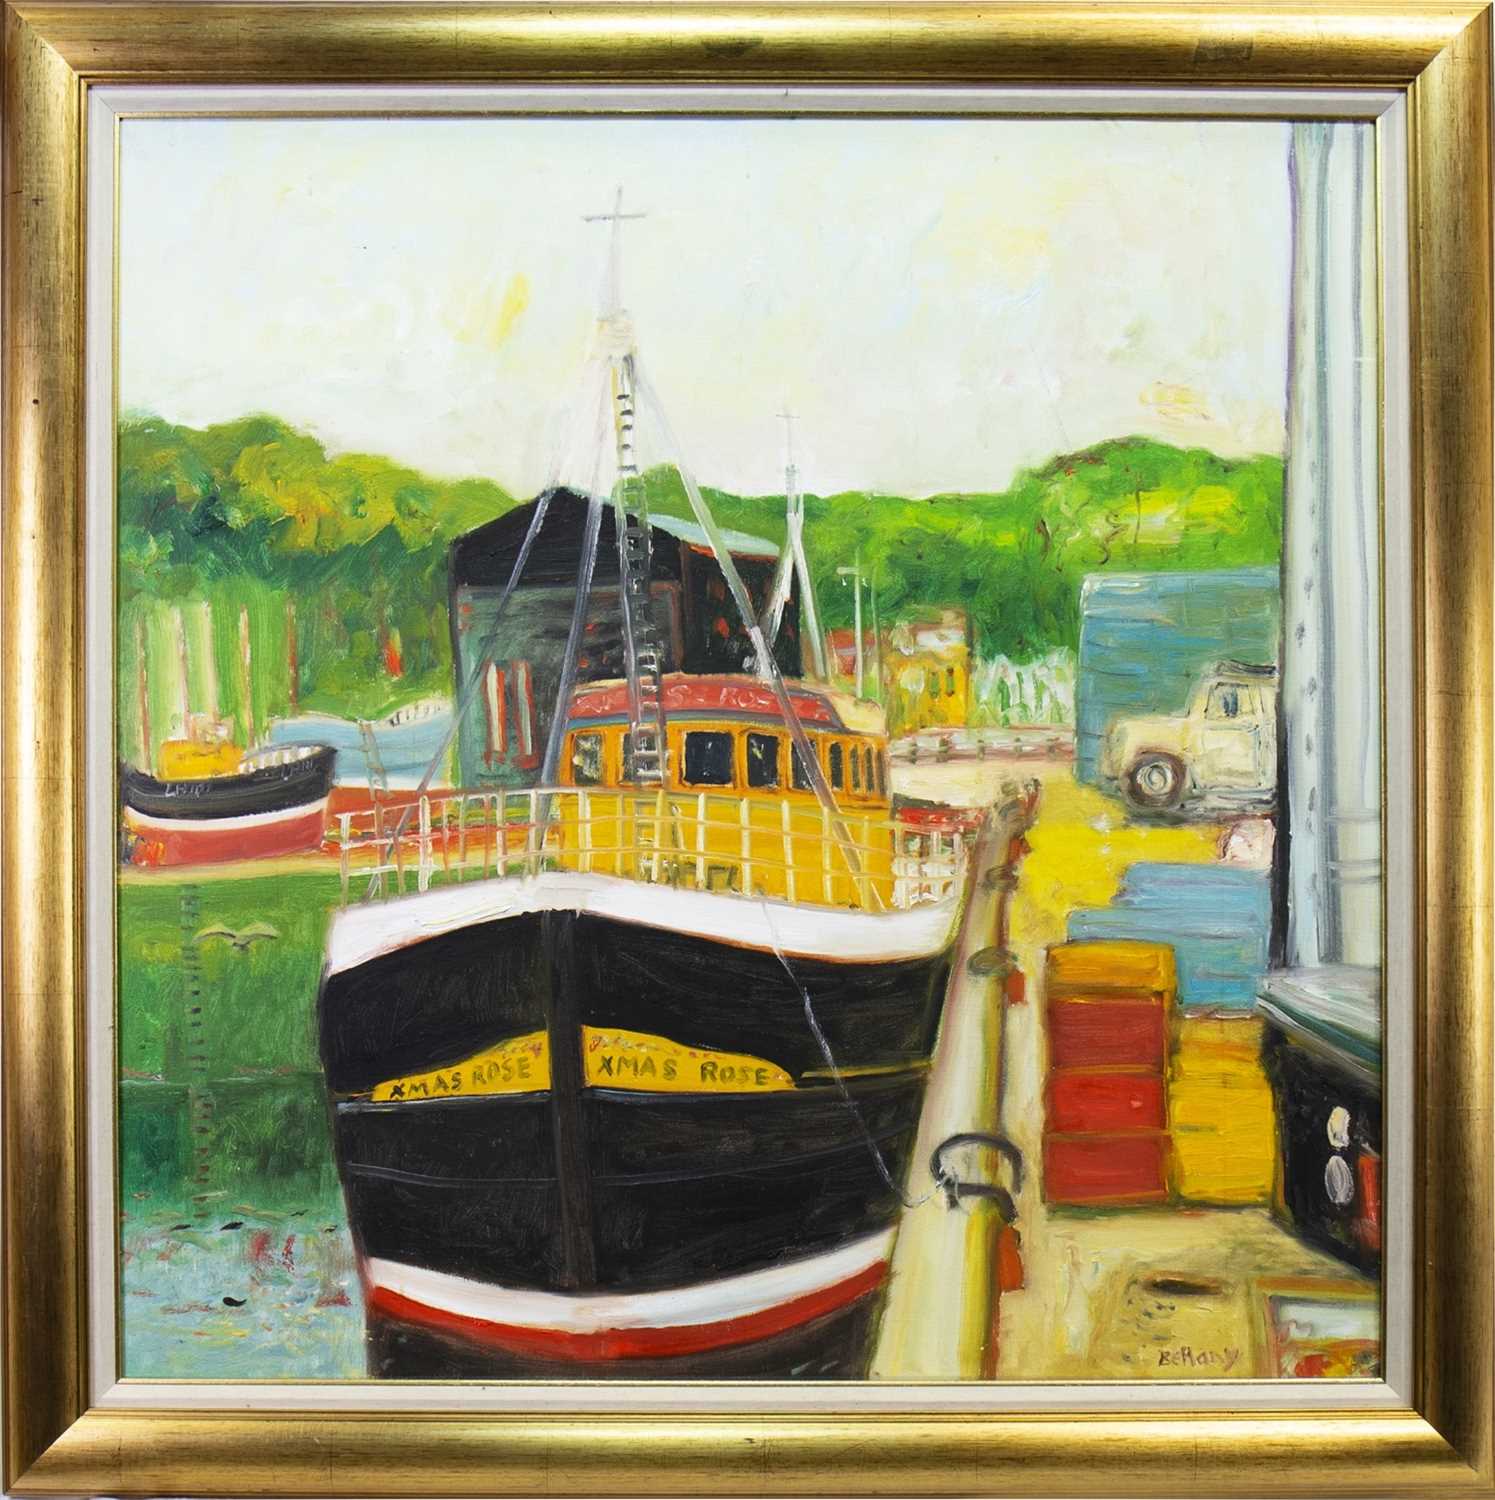 Lot 520 - XMAS ROSE IN THE HARBOUR, AN OIL BY JOHN BELLANY